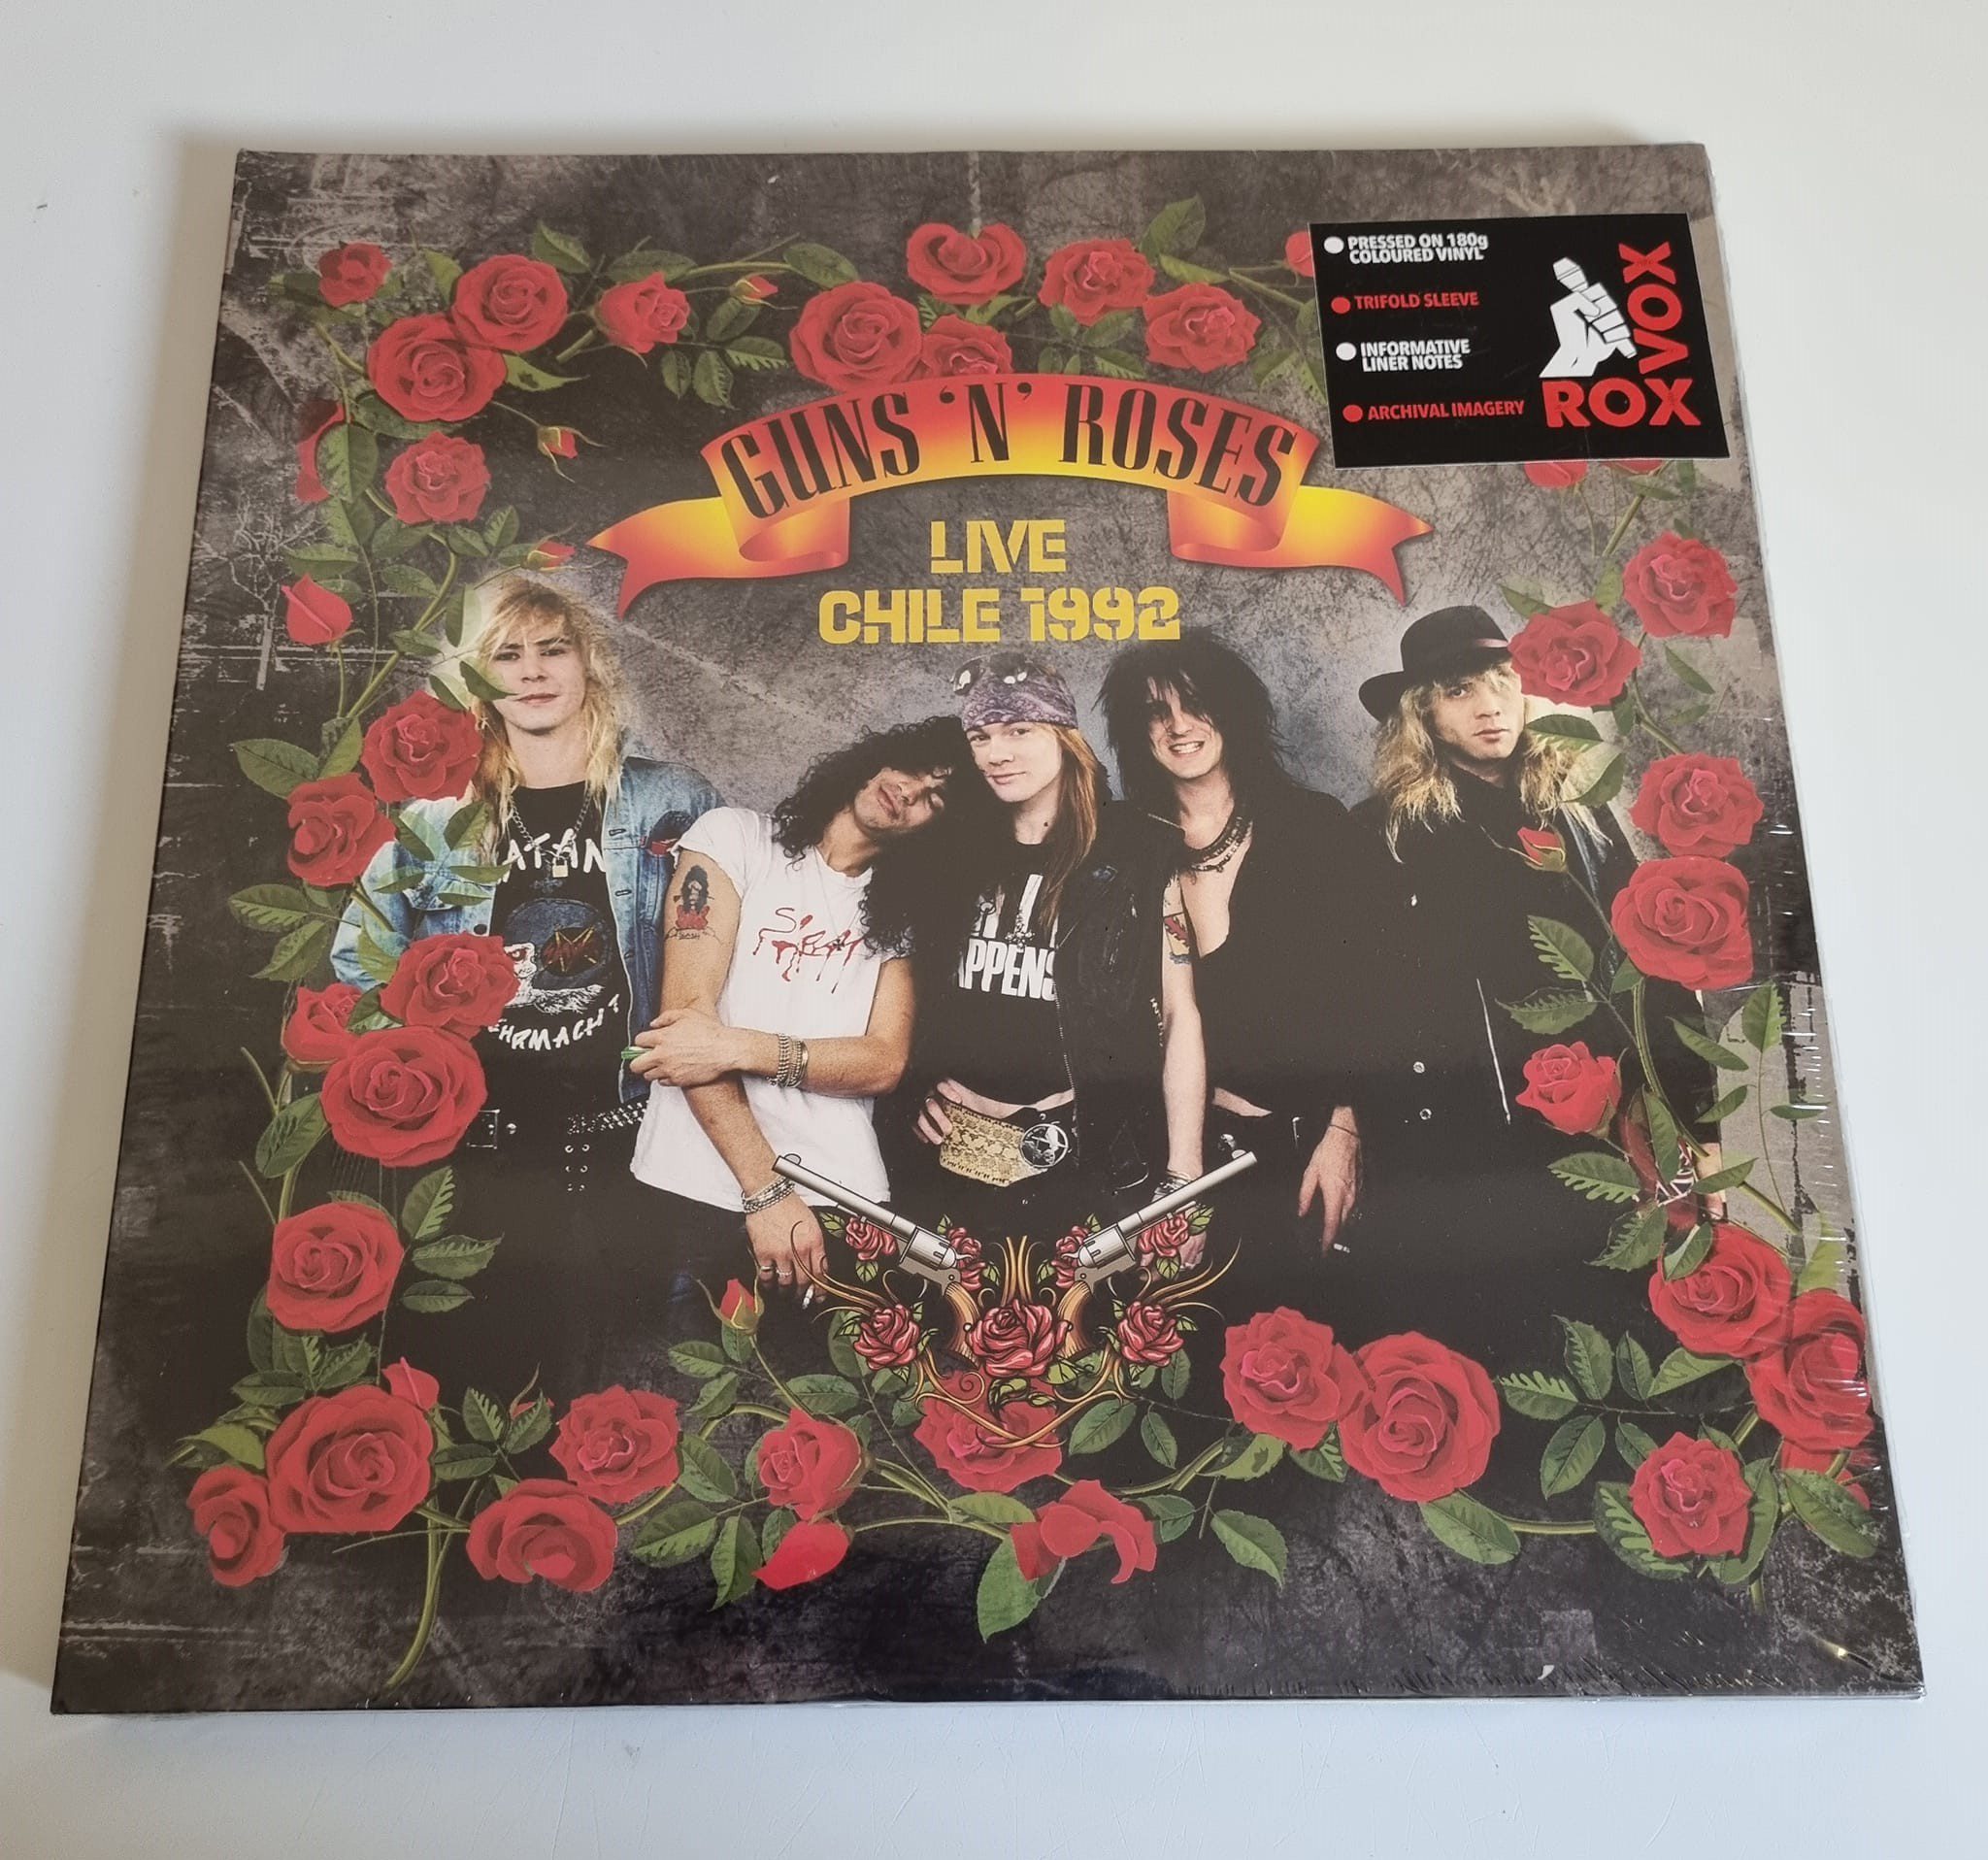 Buy this rare Guns 'n' Roses record by clicking here